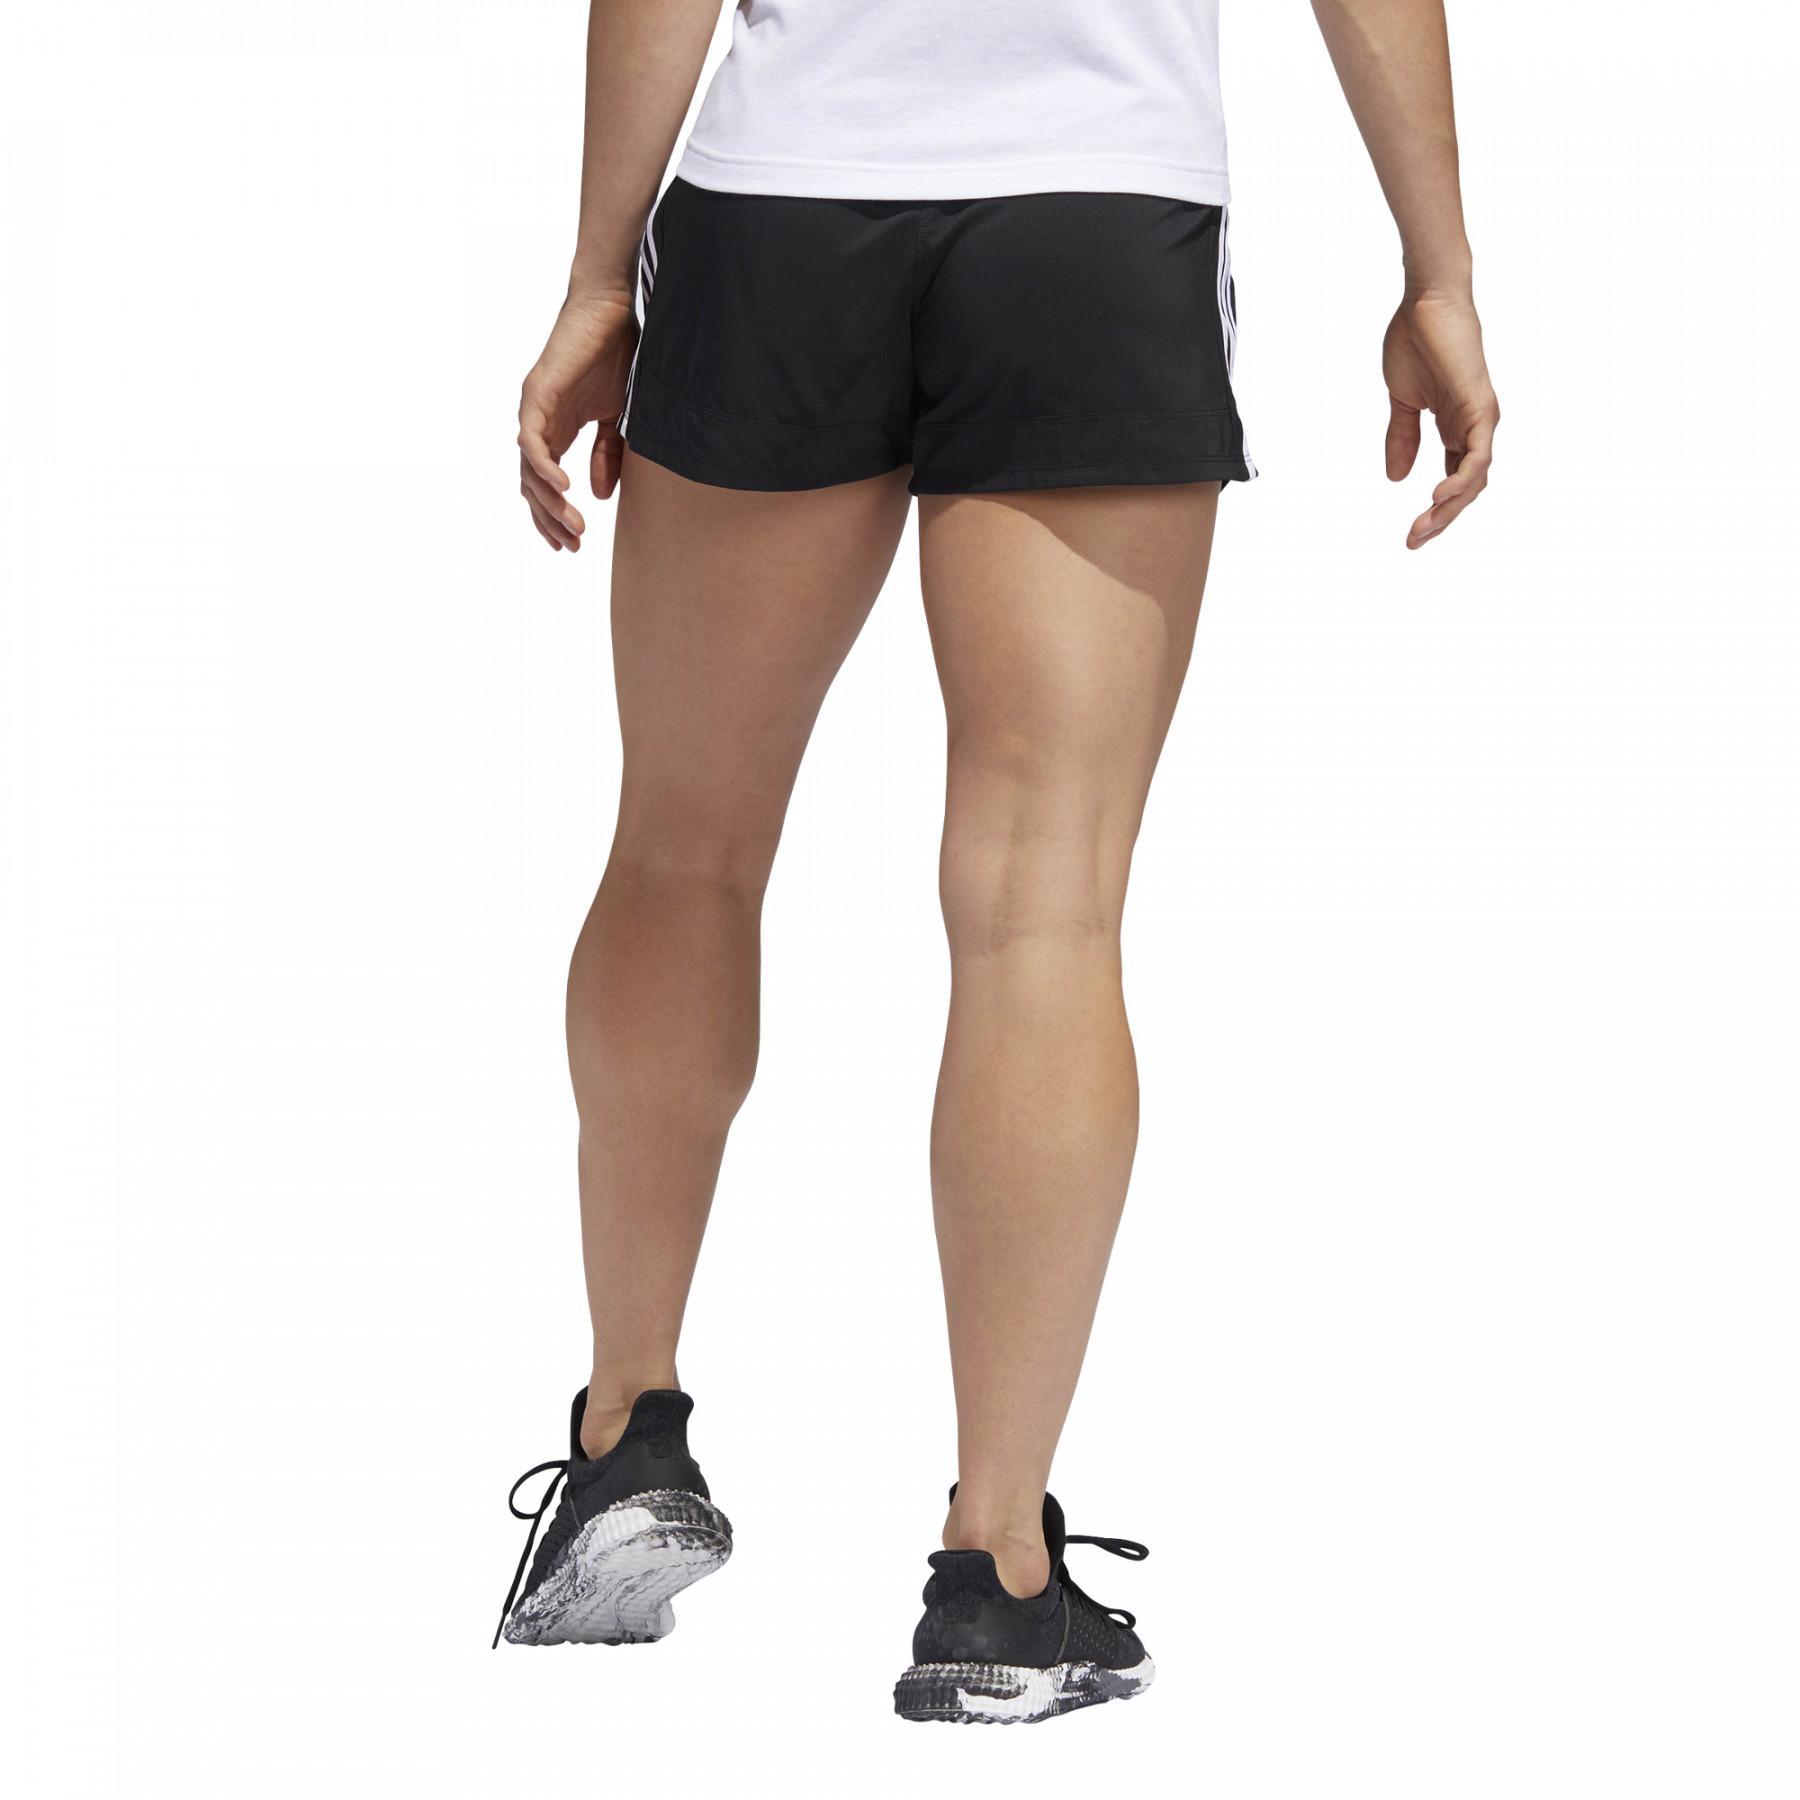 Women's shorts adidas Pacer 3 bandes Woven